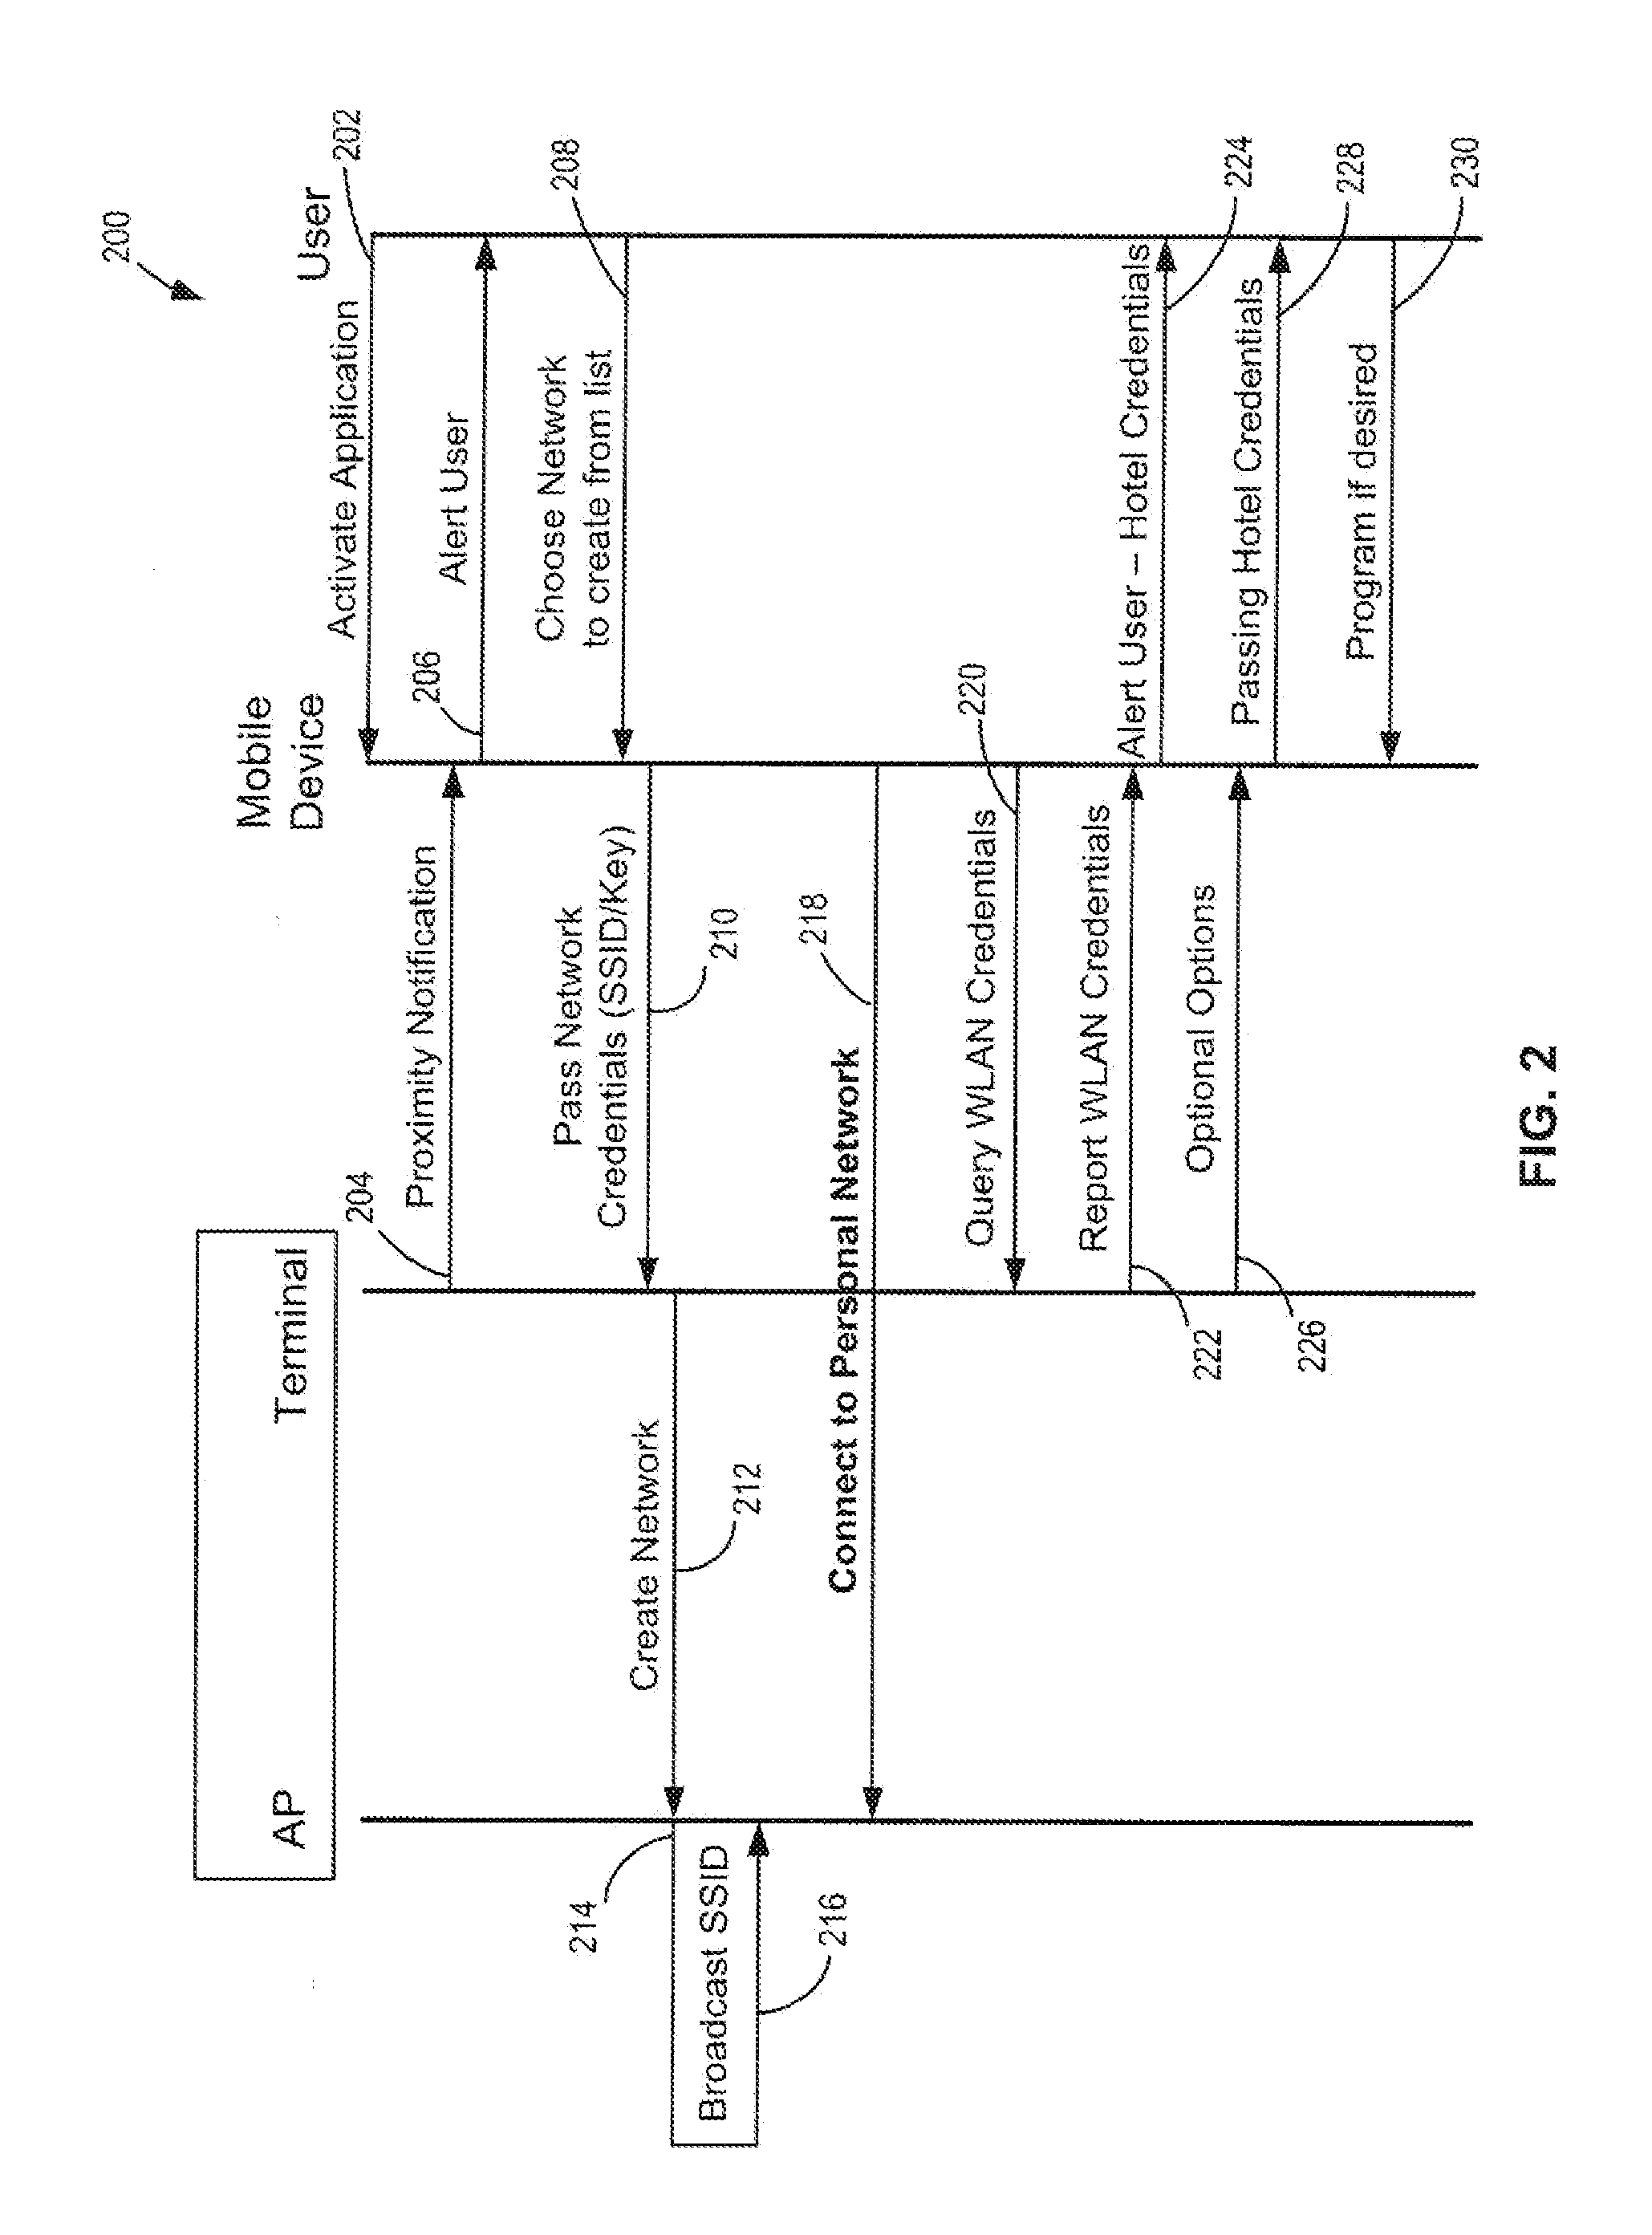 Personal Area Network System and Method